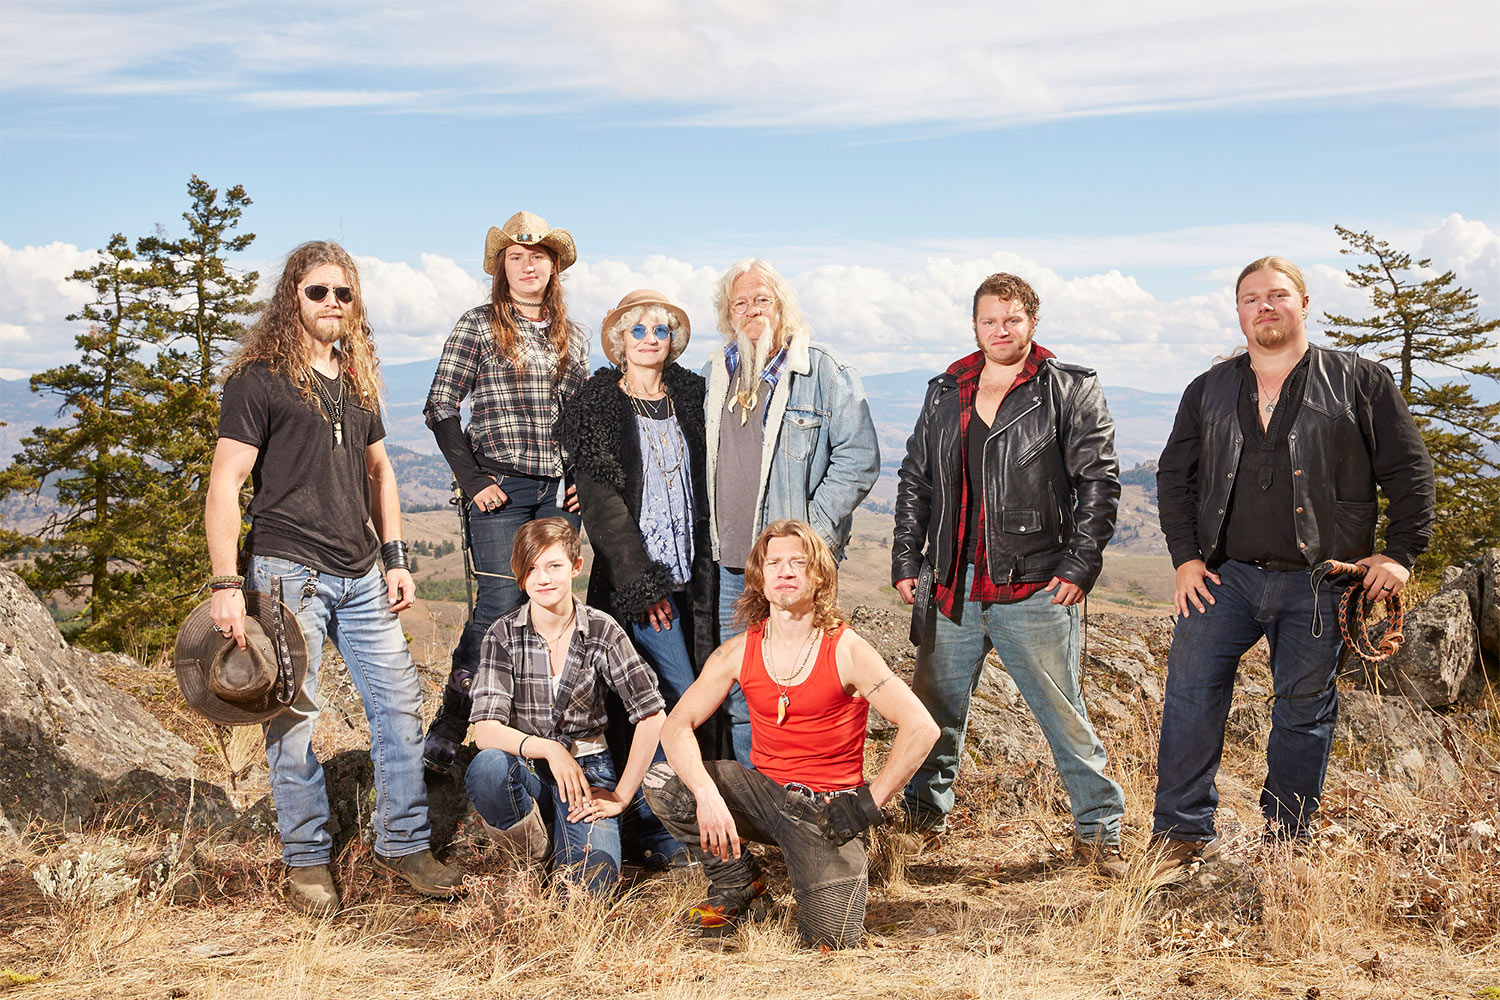 Details on Why Gabe’s Wife Raquell Rose Not on ‘Alaskan Bush People’?